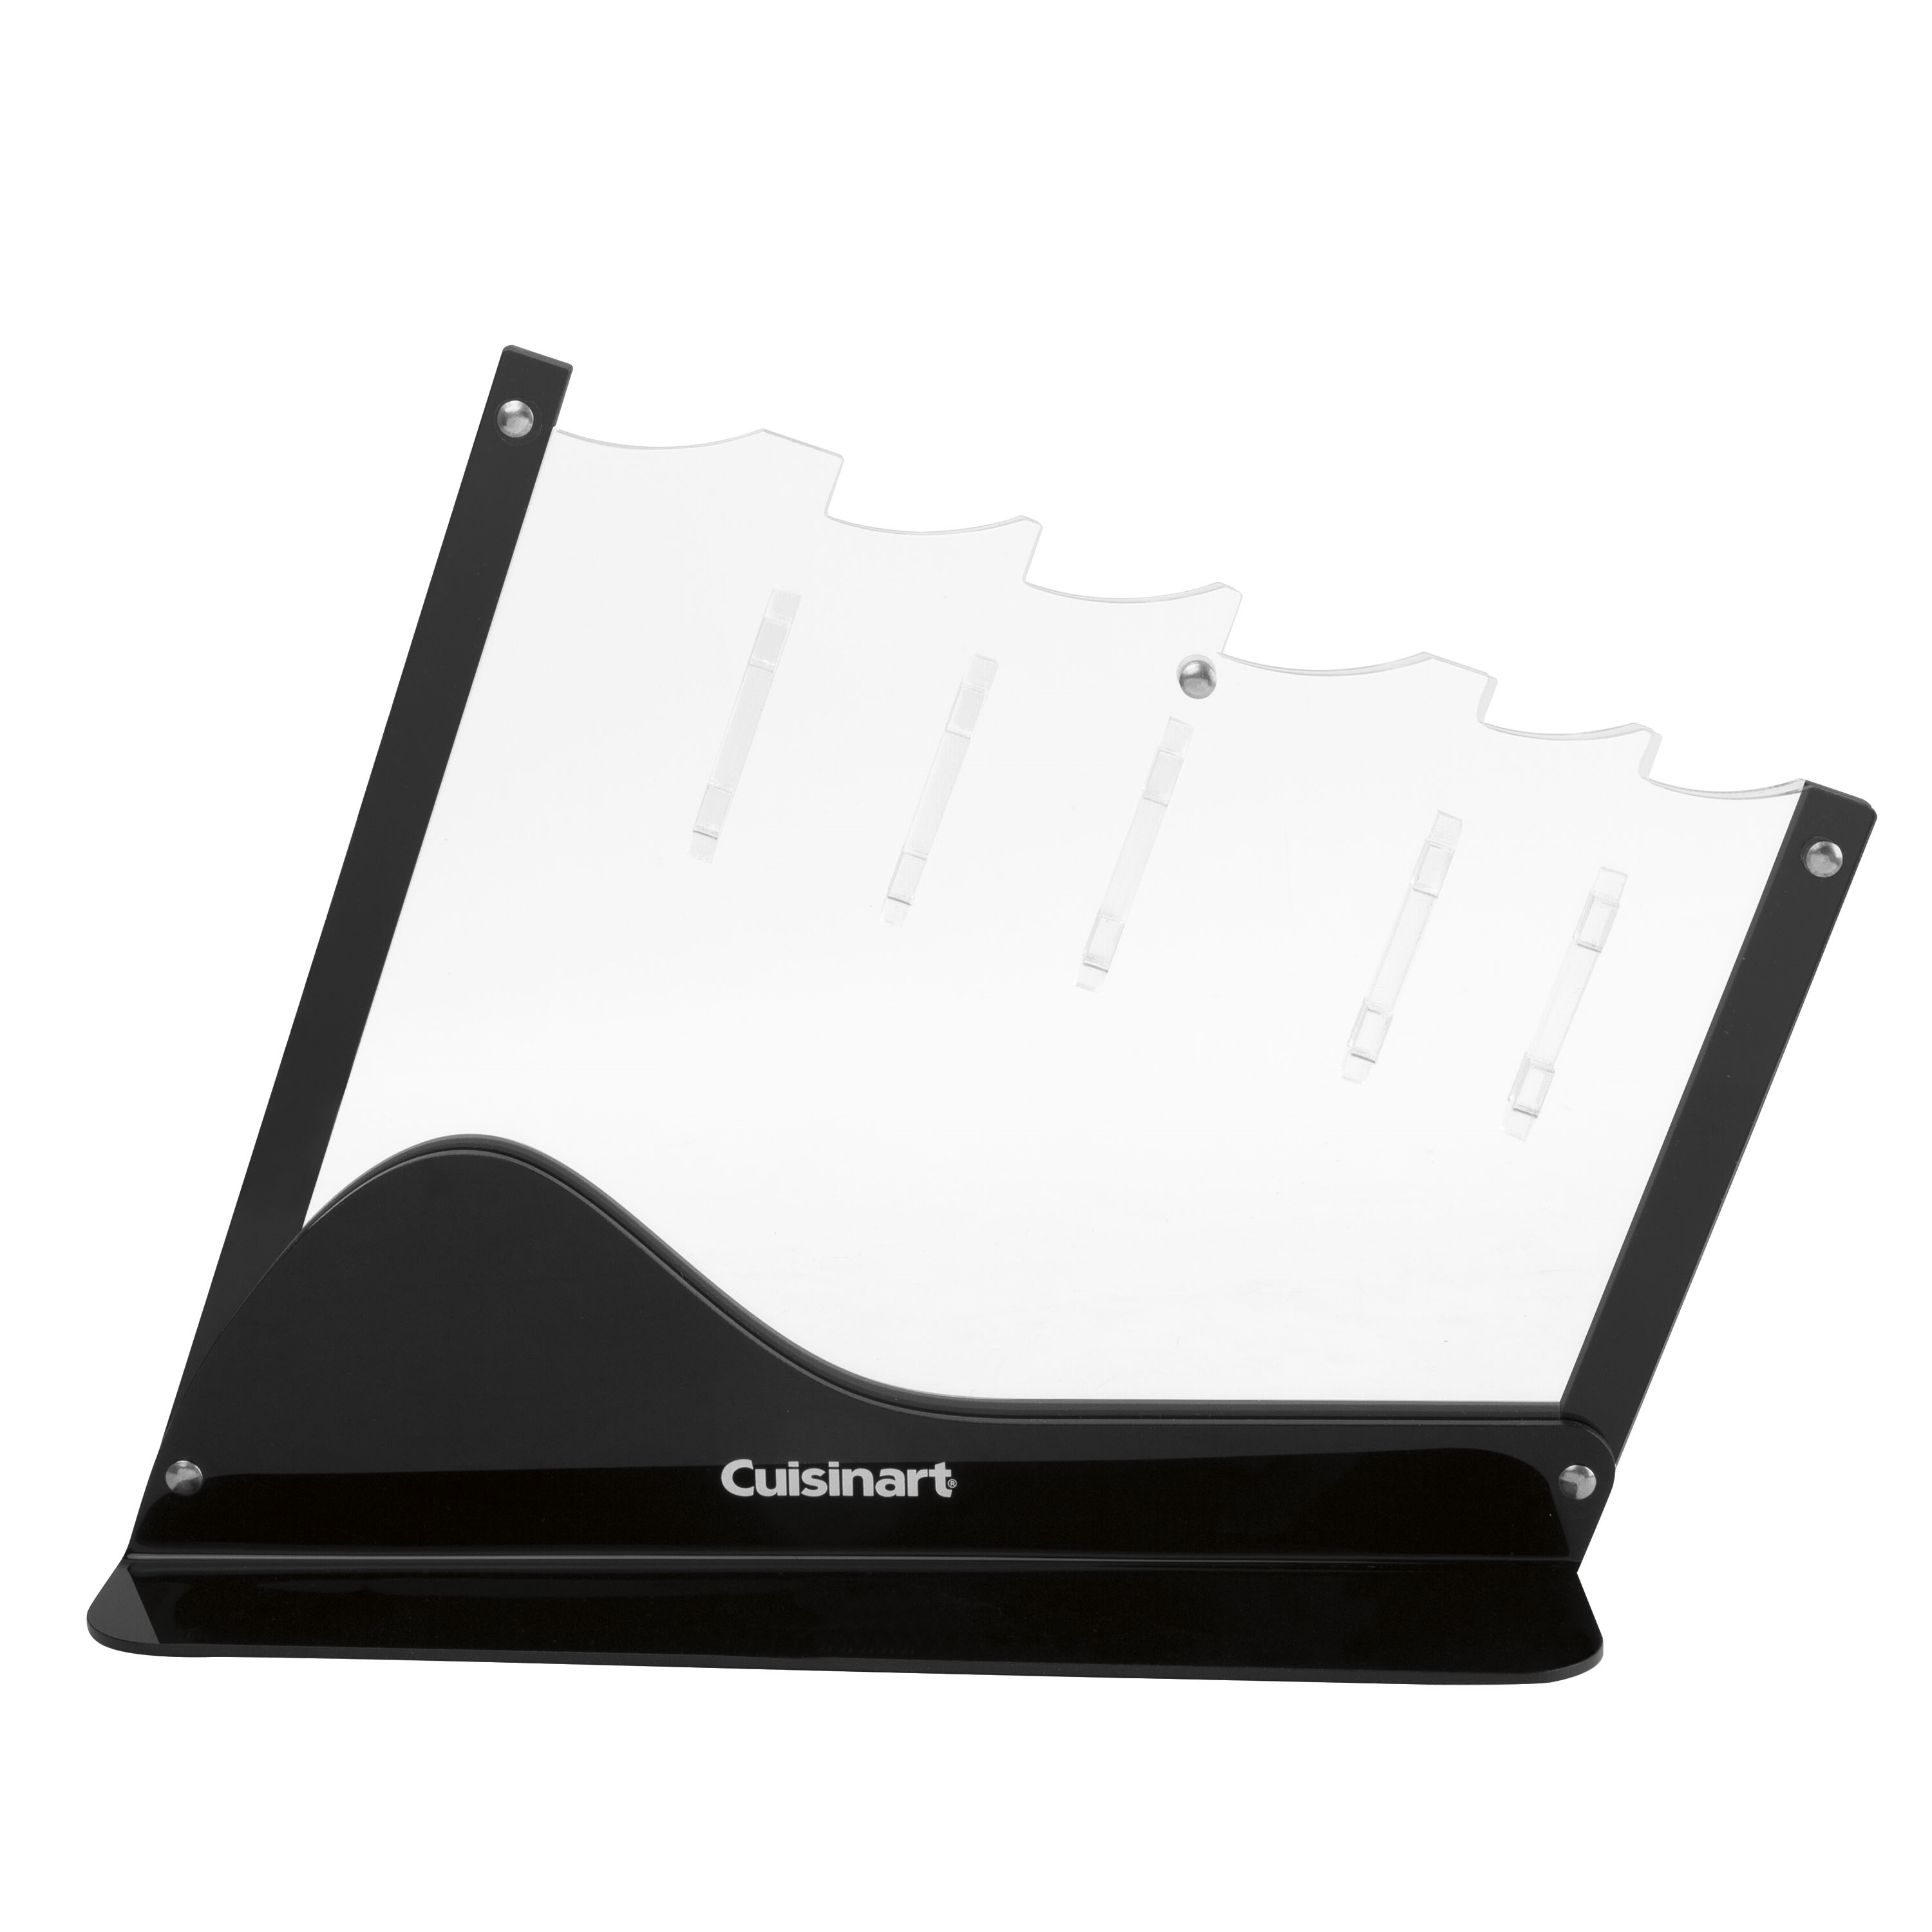 Cuisinart 7 Piece Cutlery Set with Acrylic Stand & Reviews